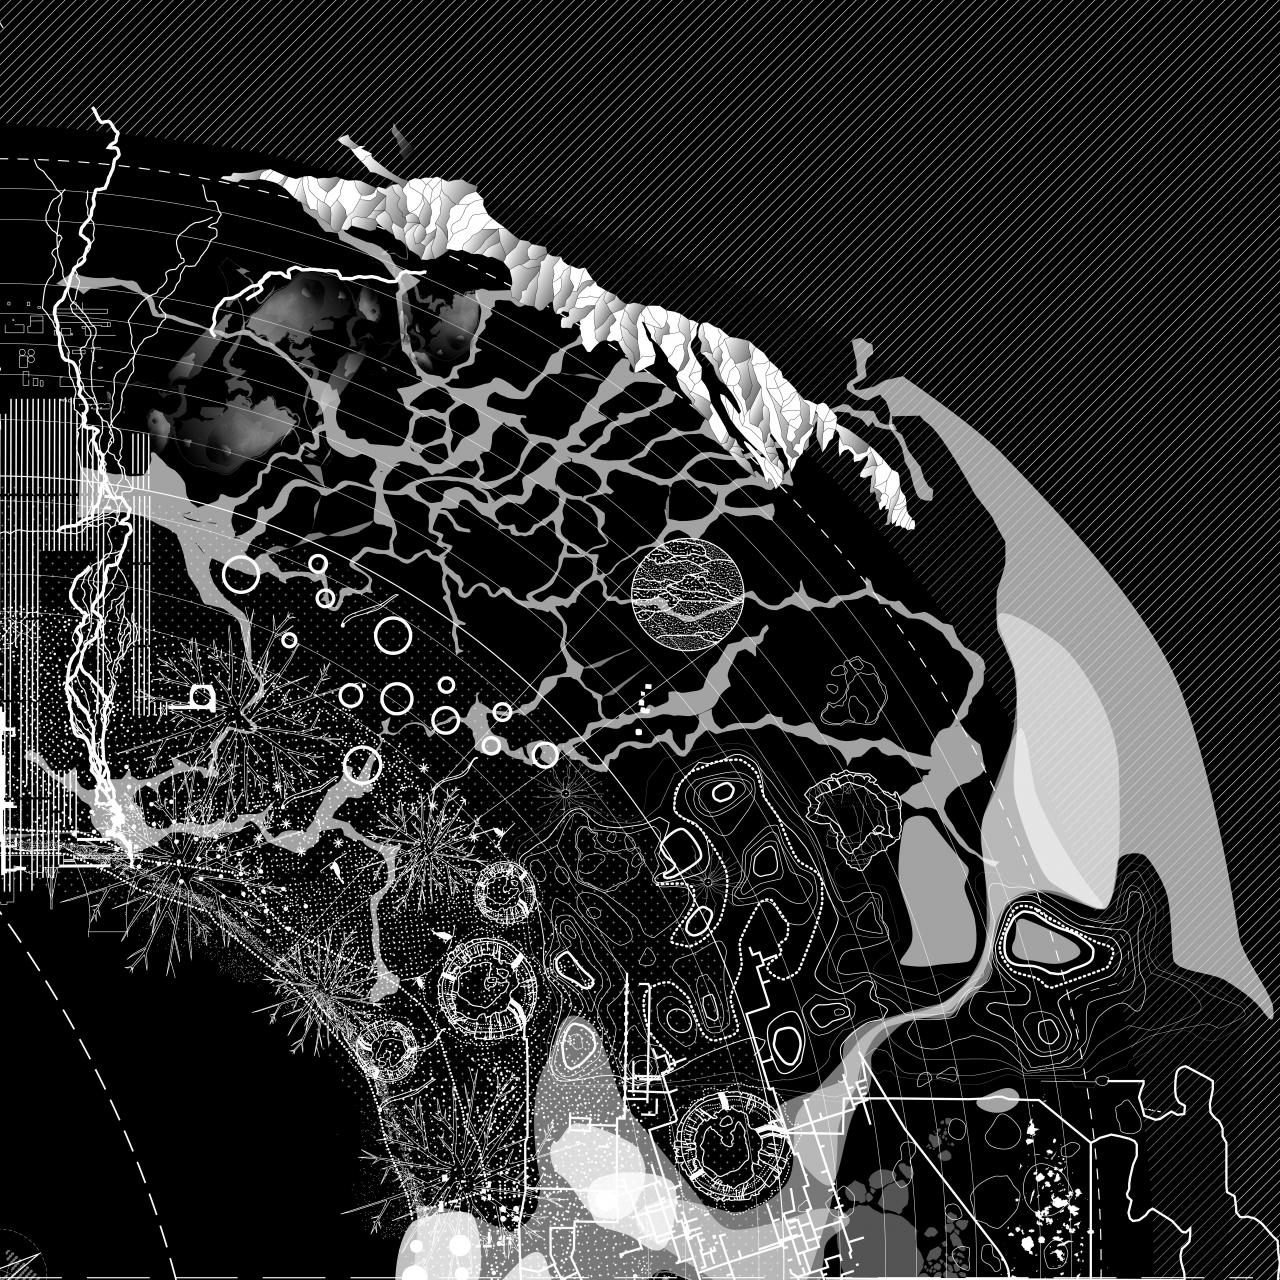 Abstract map in black and white for the exhibition »Critical Zones« by Bruno Latour